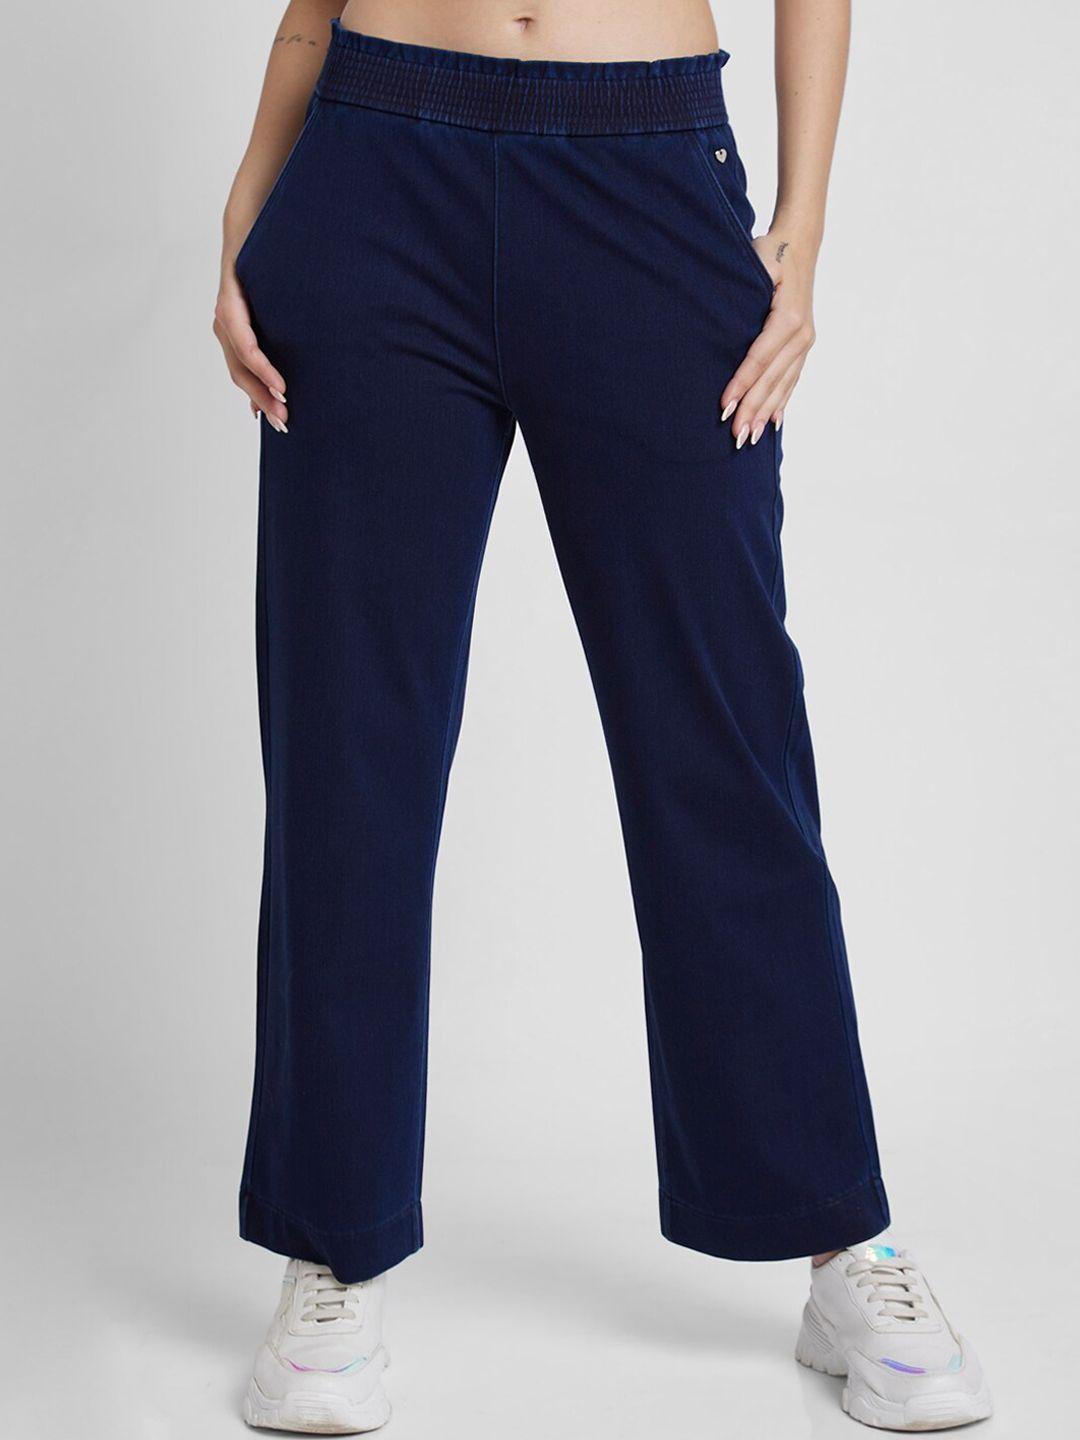 spykar women ankle-length tapered fit track pants